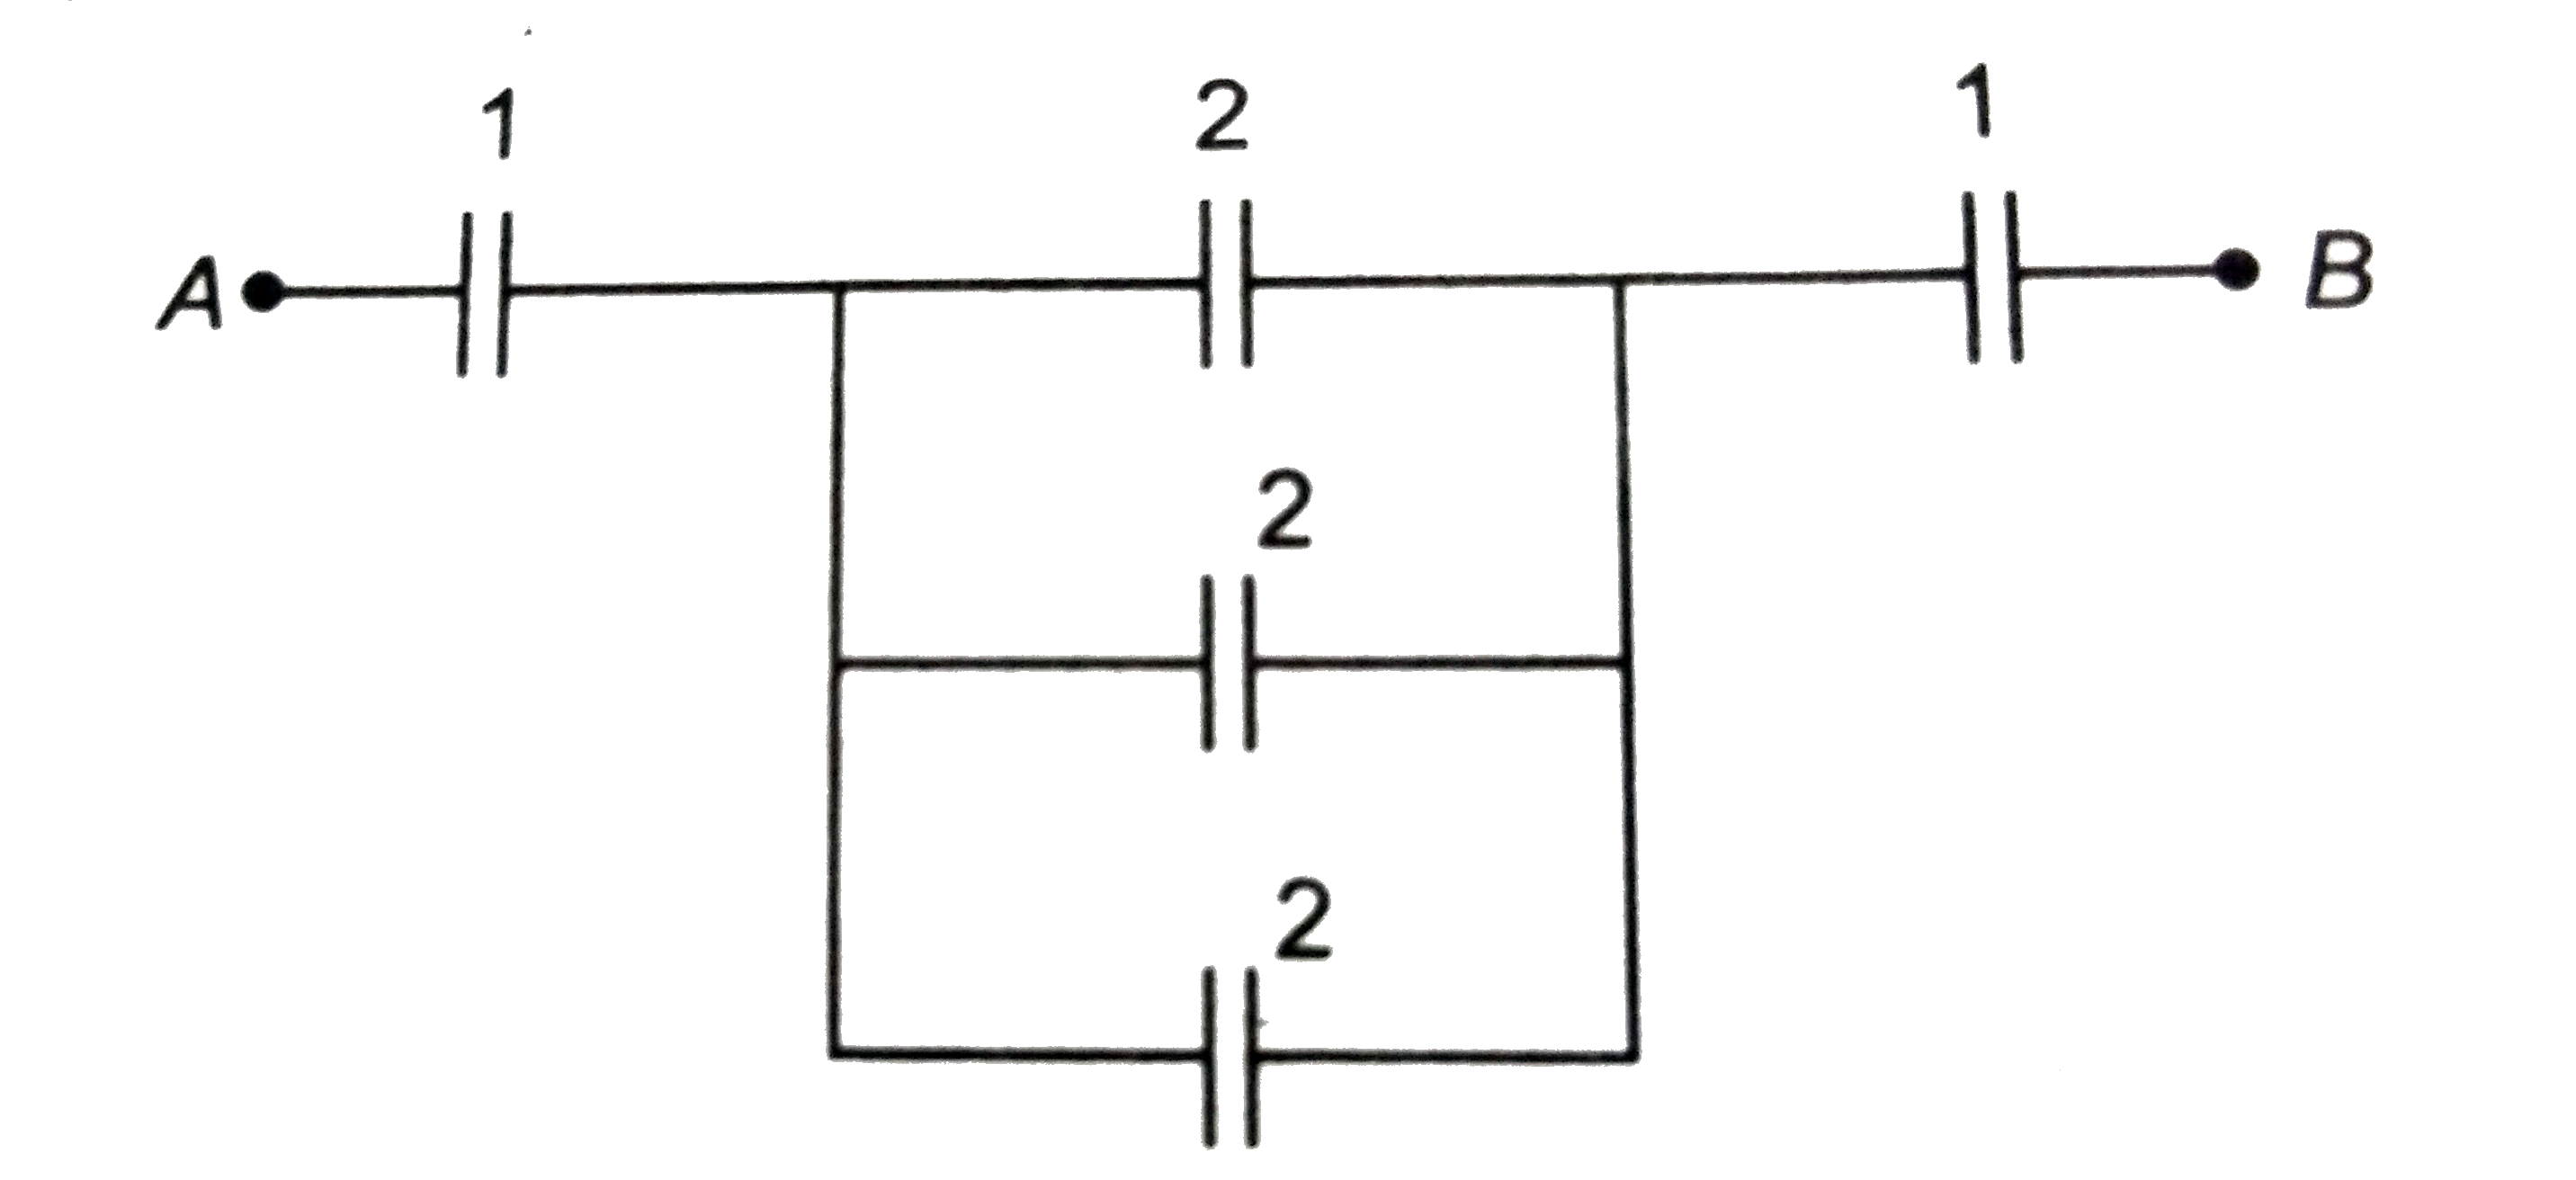 In the connections shown in the adjoining figure, the equivalent capacity between points A and B will be